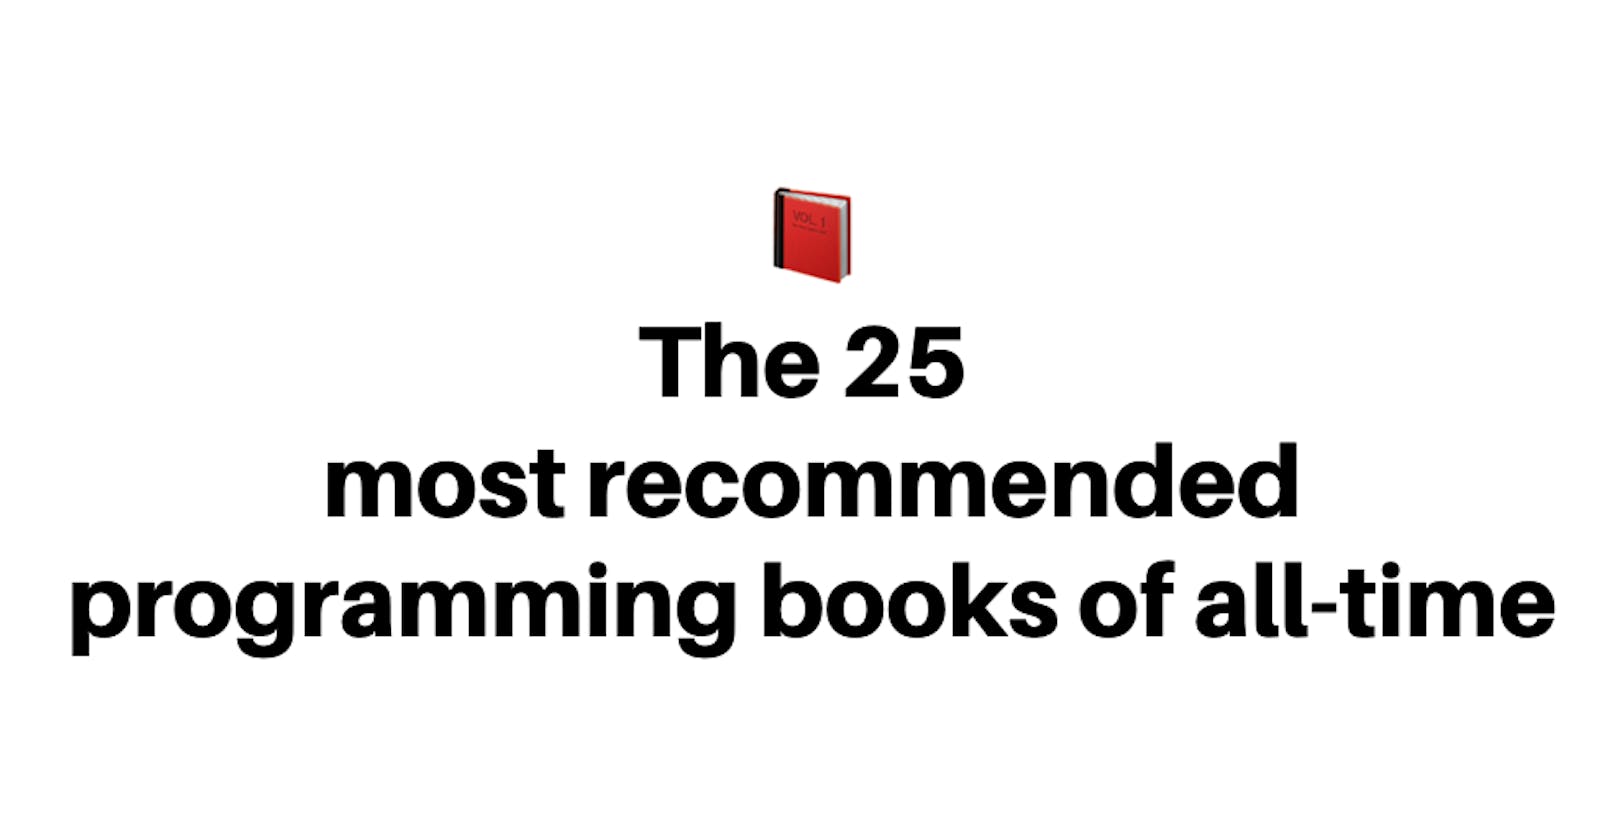 📕 The most recommended programming books of all-time